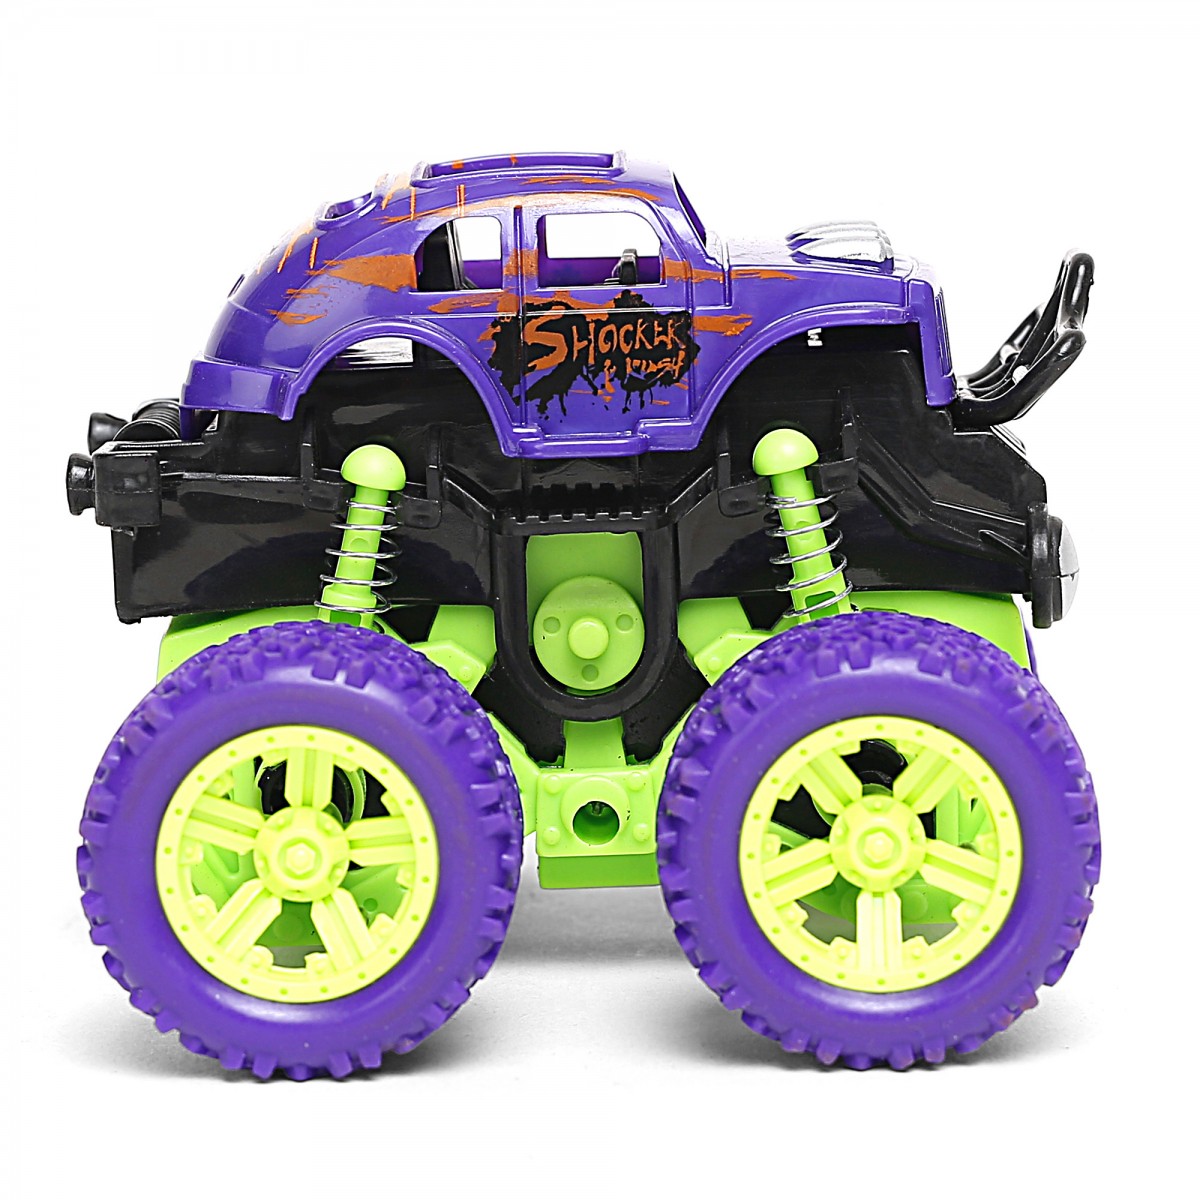 Ralleyz Friction Toy Car With Grip Wheels 4 Wheel Drive Force Amazing Kids Play Mini Toy Car Purple 6Y+